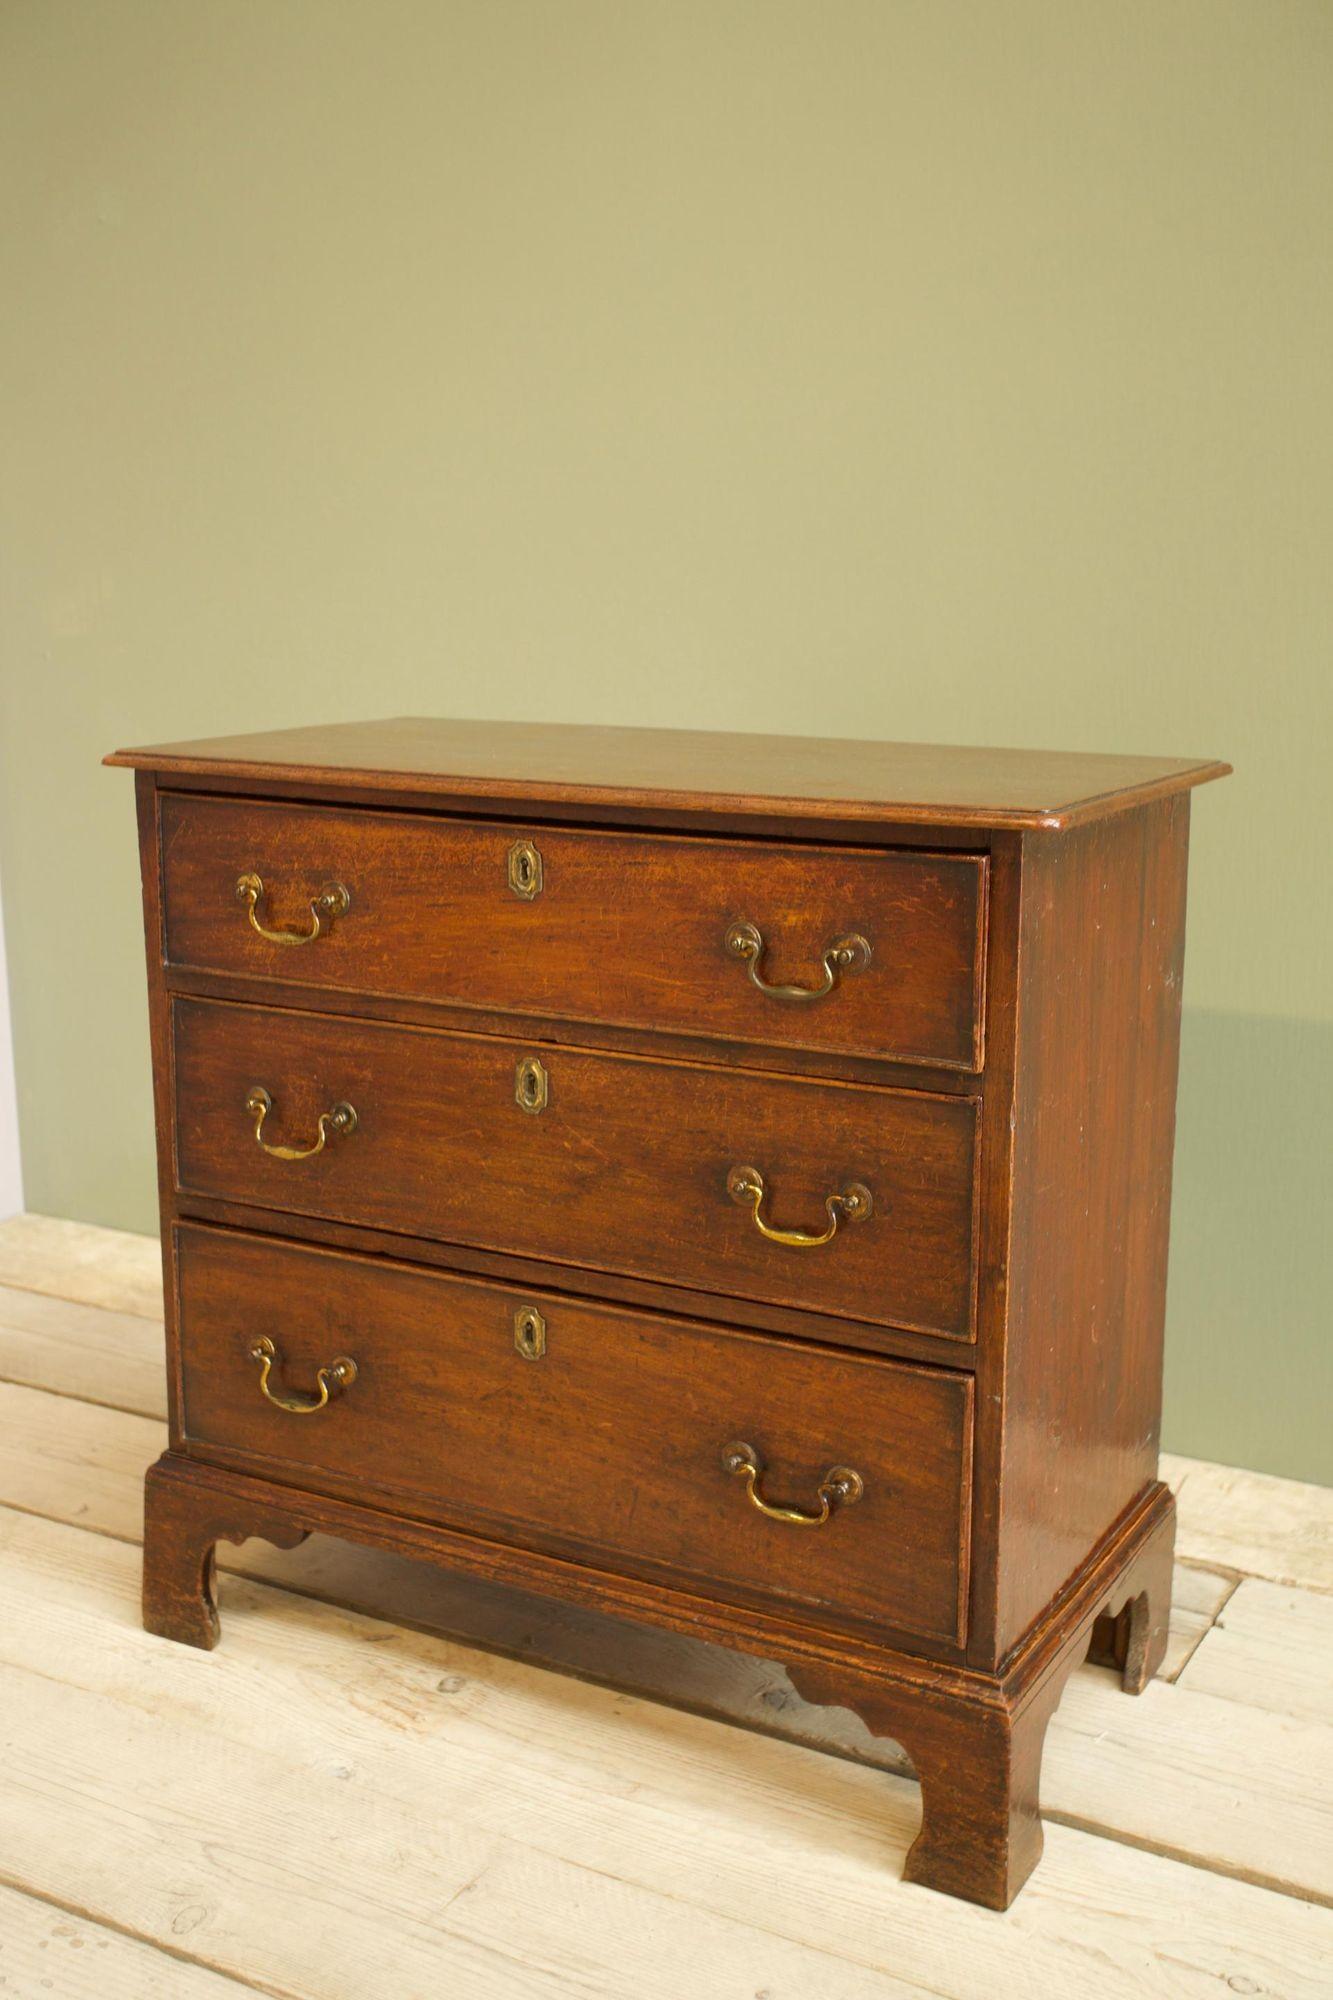 Small sized Georgian mahogany chest of drawers 1